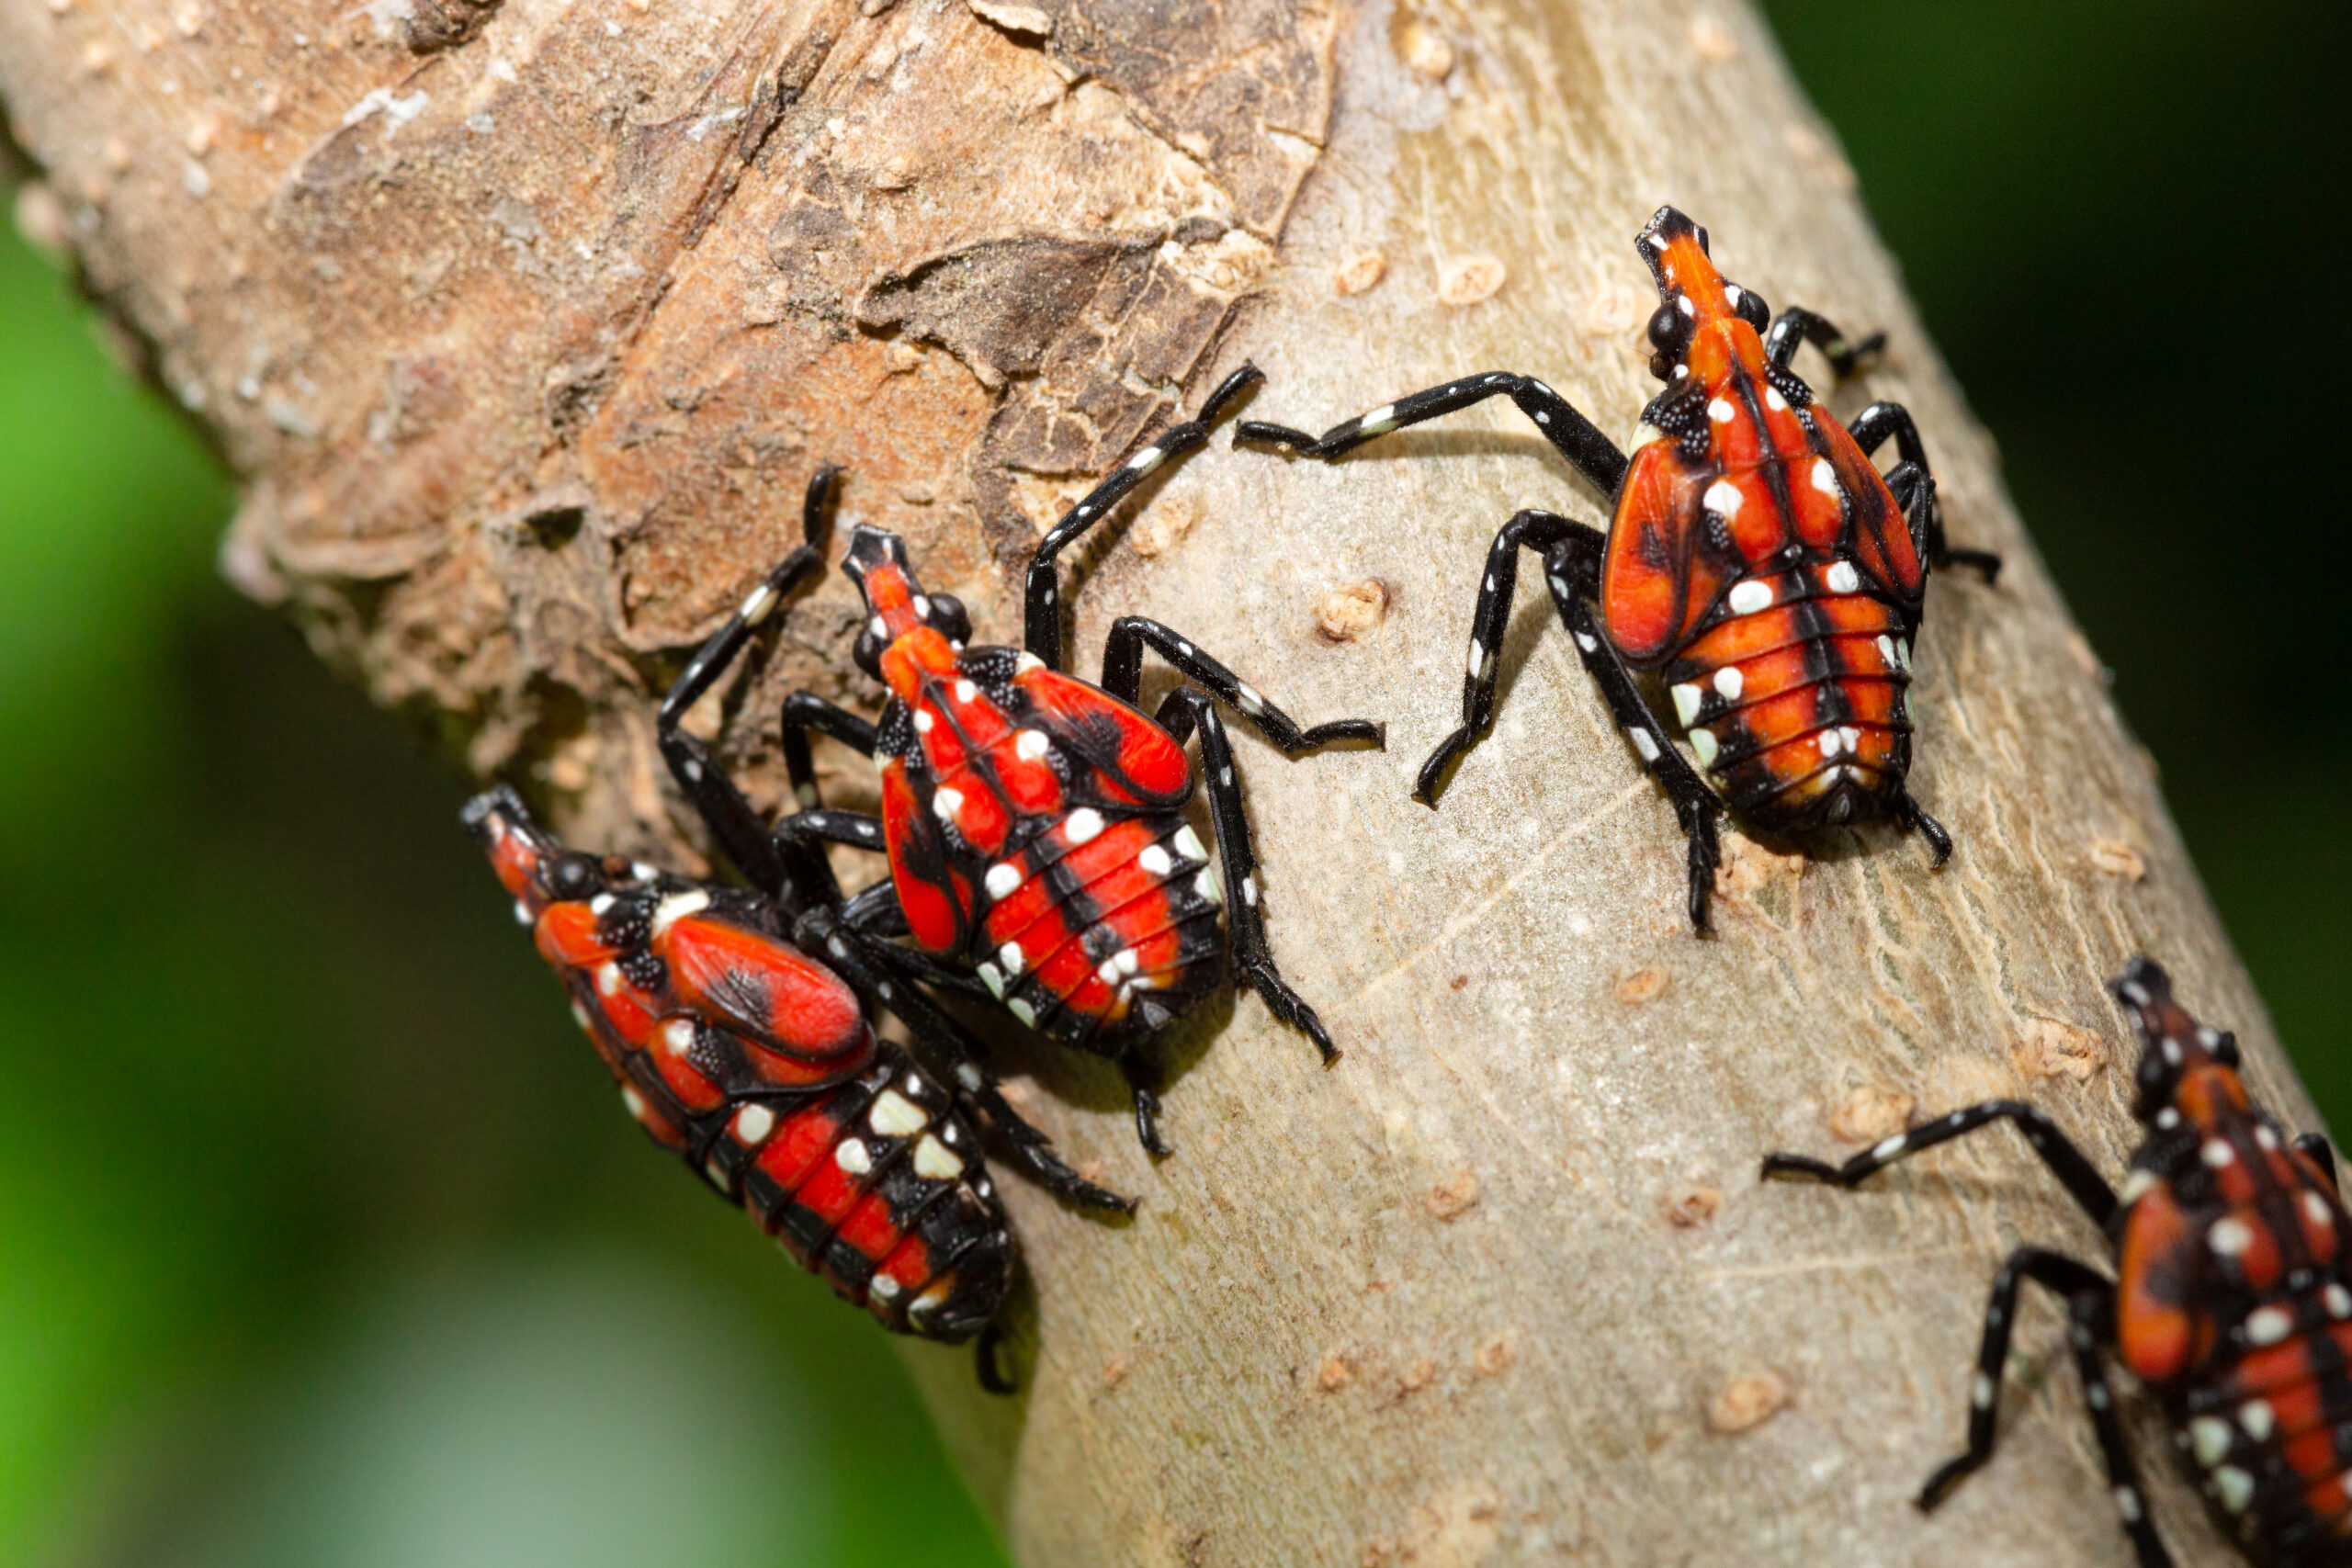 Spotted lanternfly nymphs can be identified by their bright red bodies.